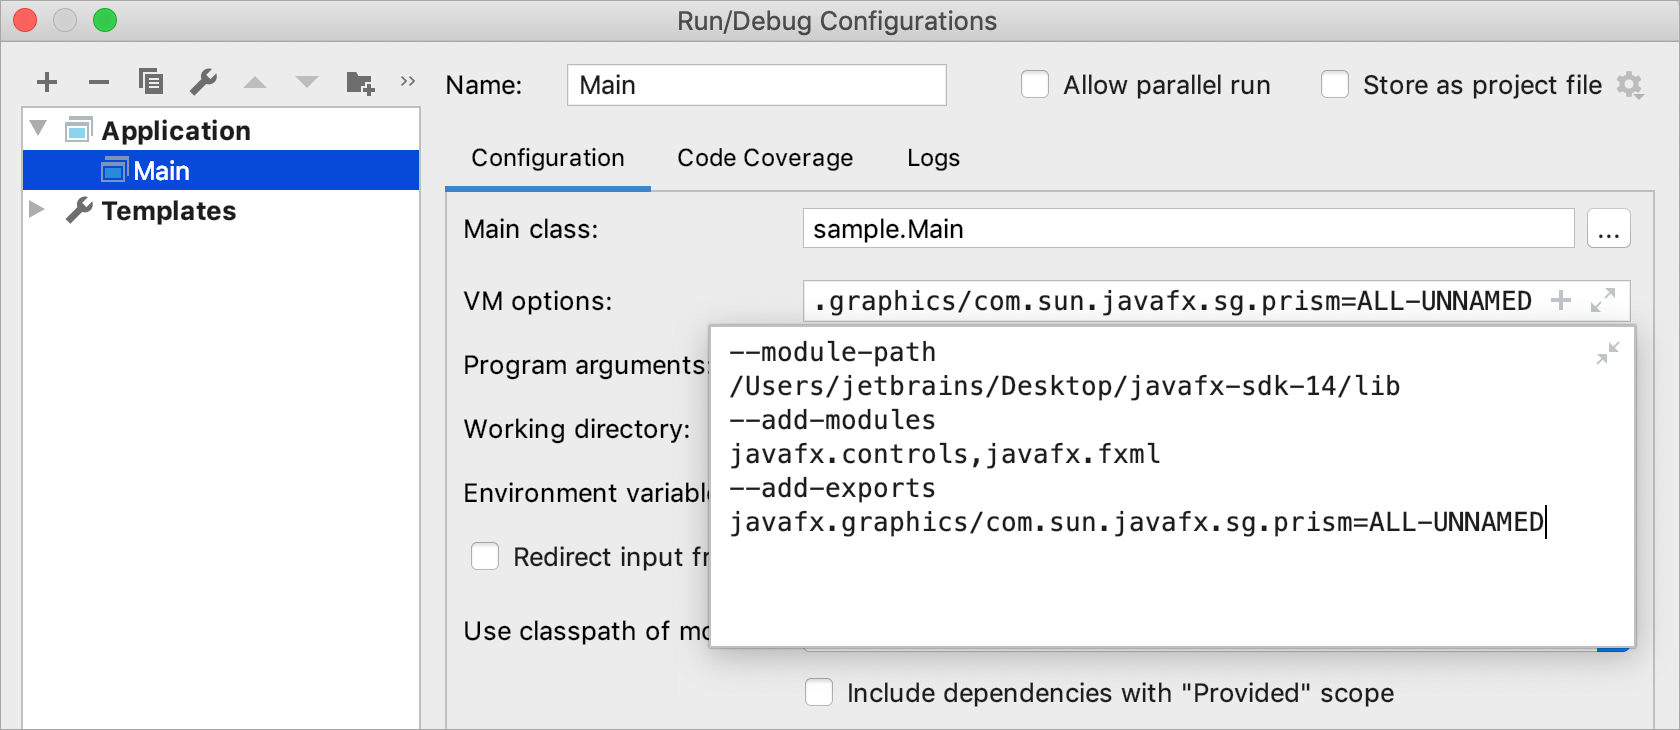 Specifying VM options for JavaFX